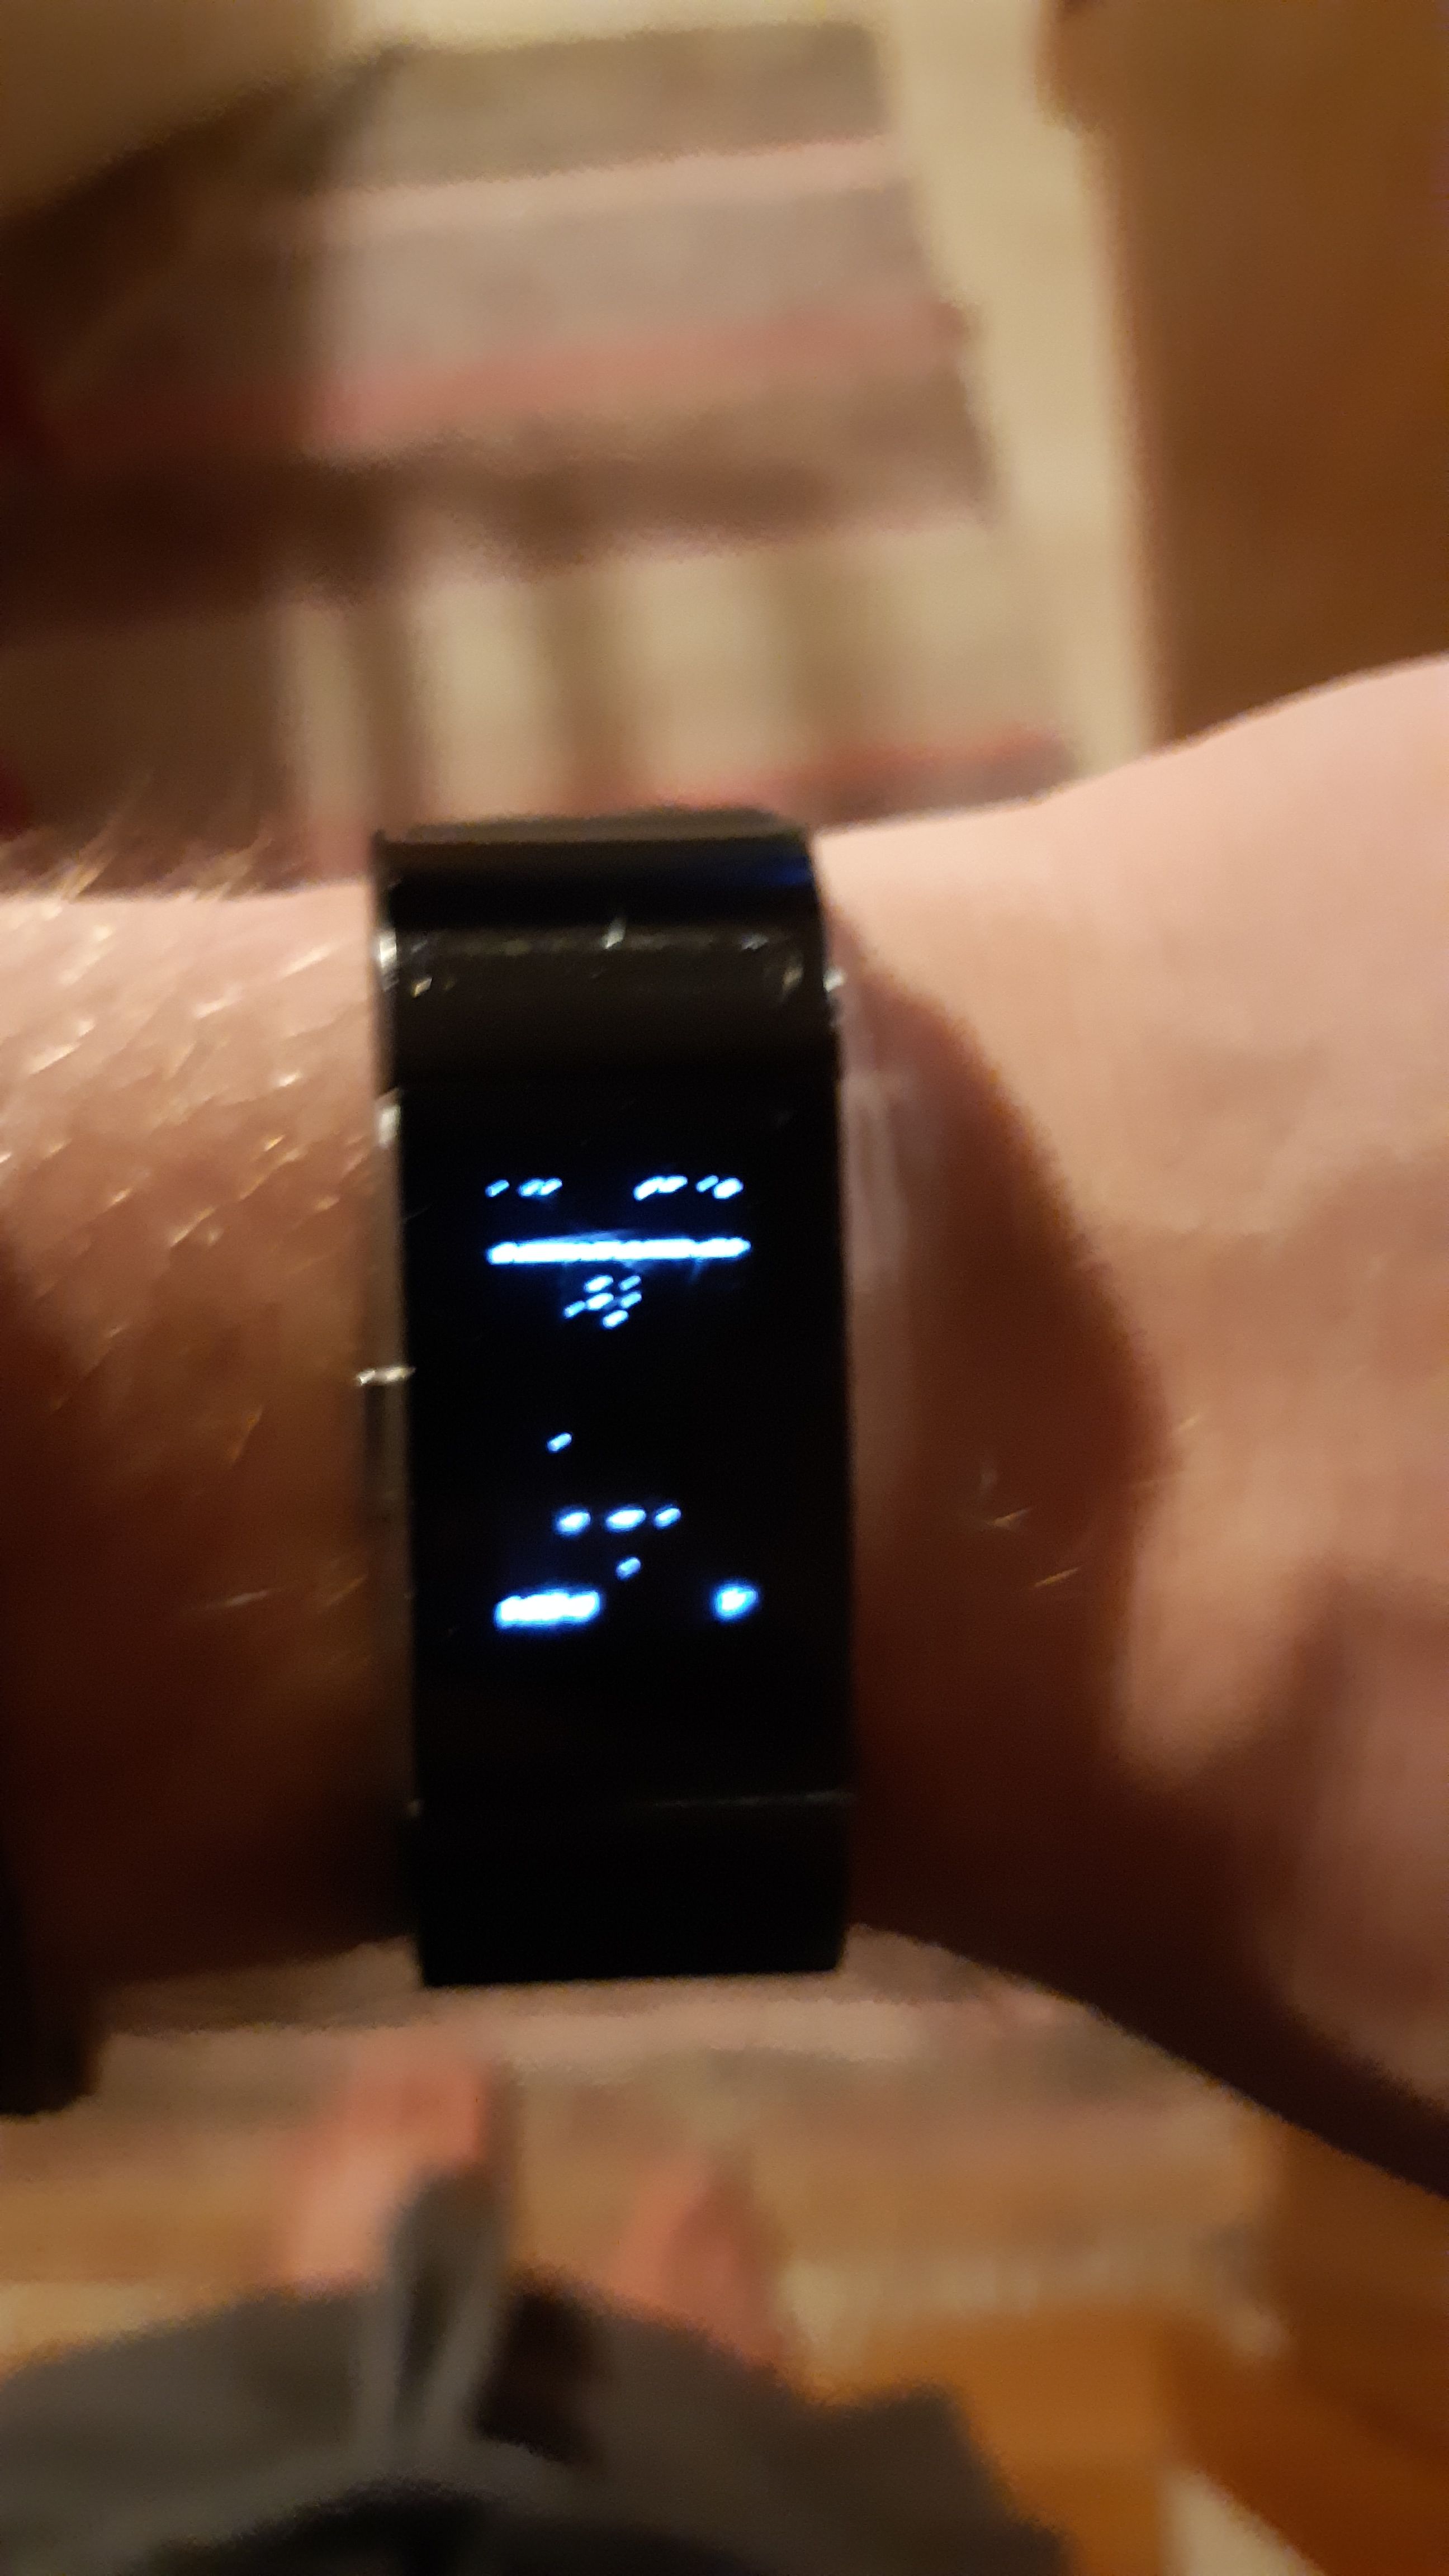 fitbit charge 4 blank screen but vibrates